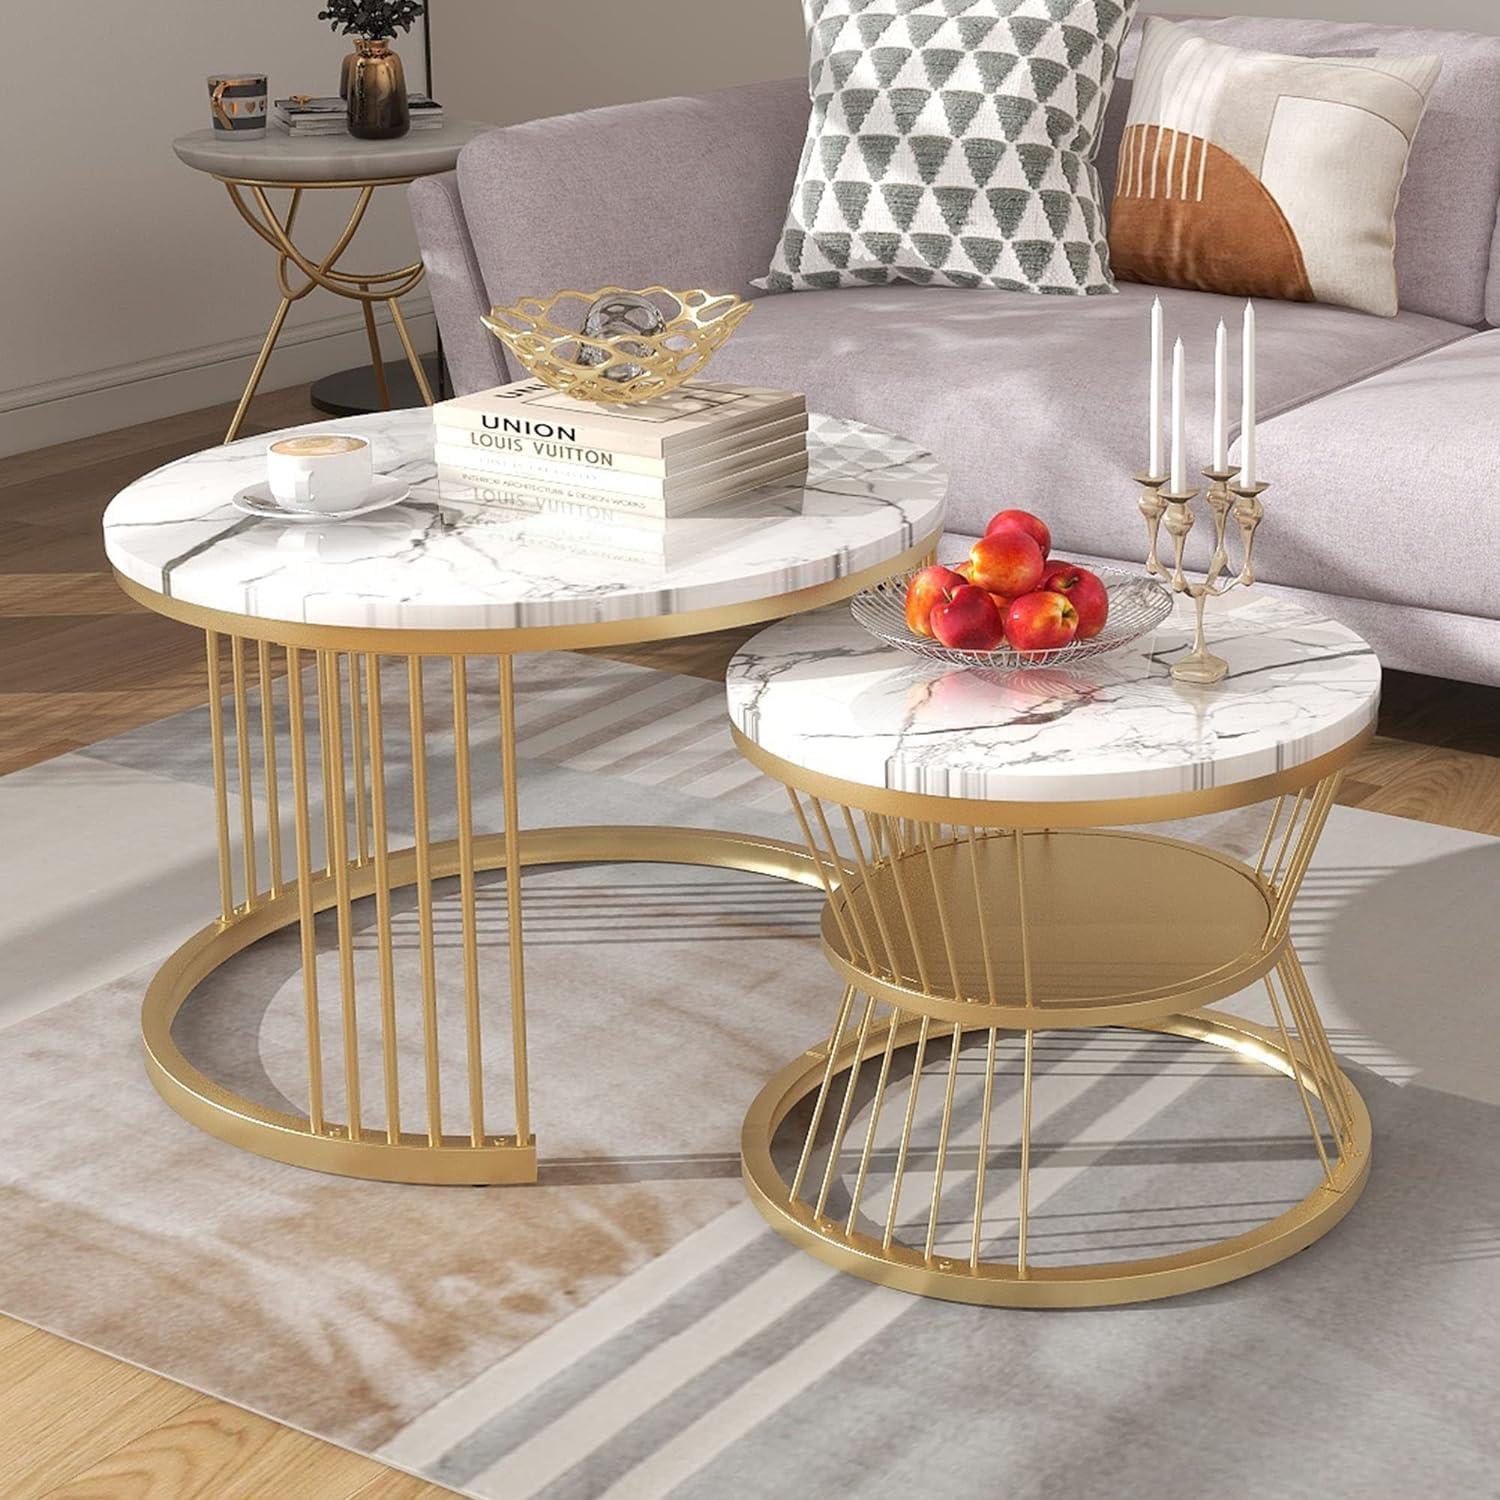 Iron Frame Marbled Laminated Round Coffee Table Set of 2 Stacking Center Tables for Living Room Bedroom or Apartments (Golden White)